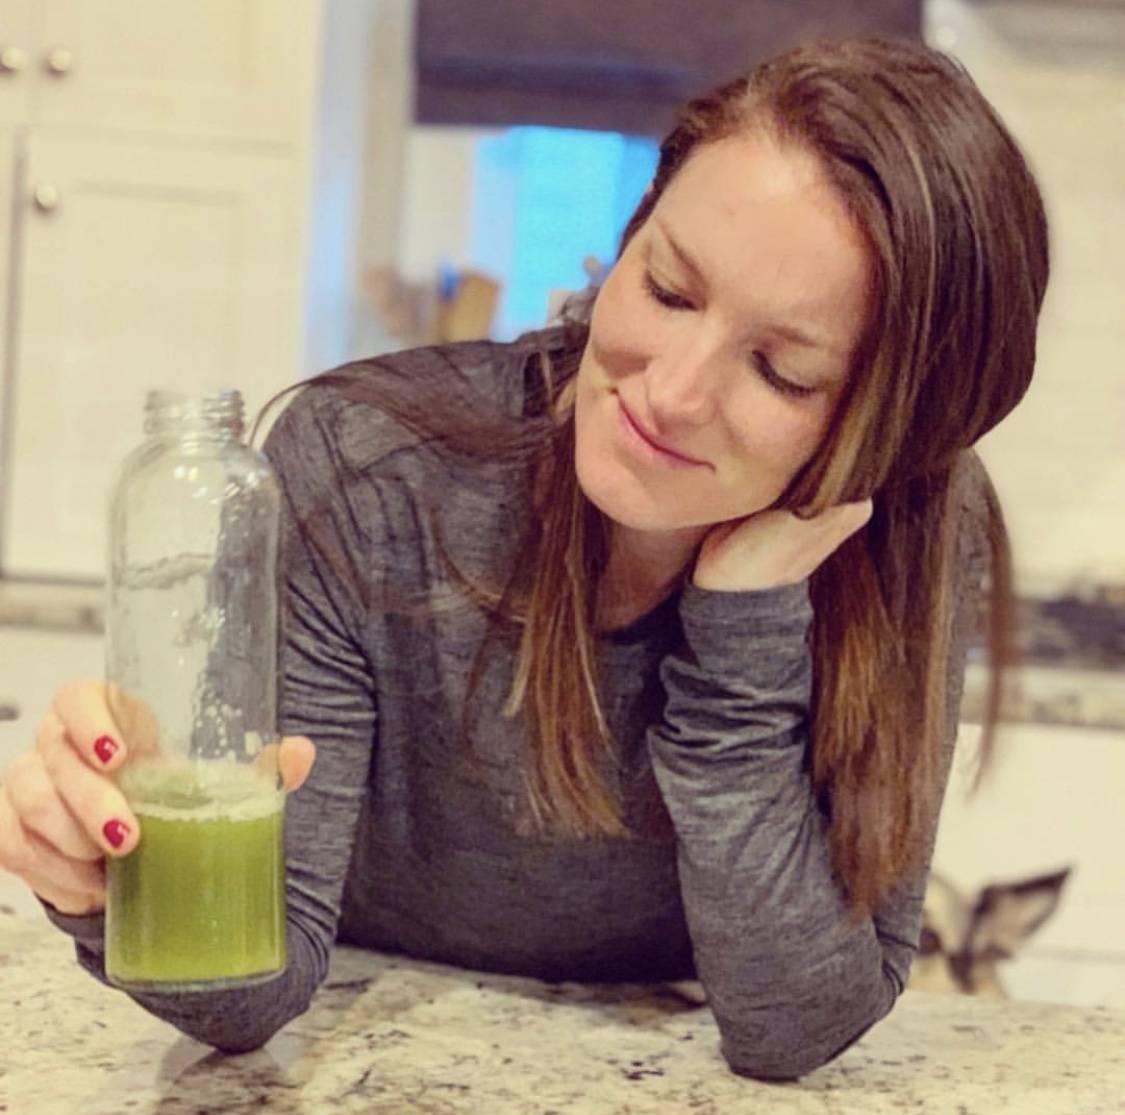 Heres What Happened When I Drank Celery Juice for a Month